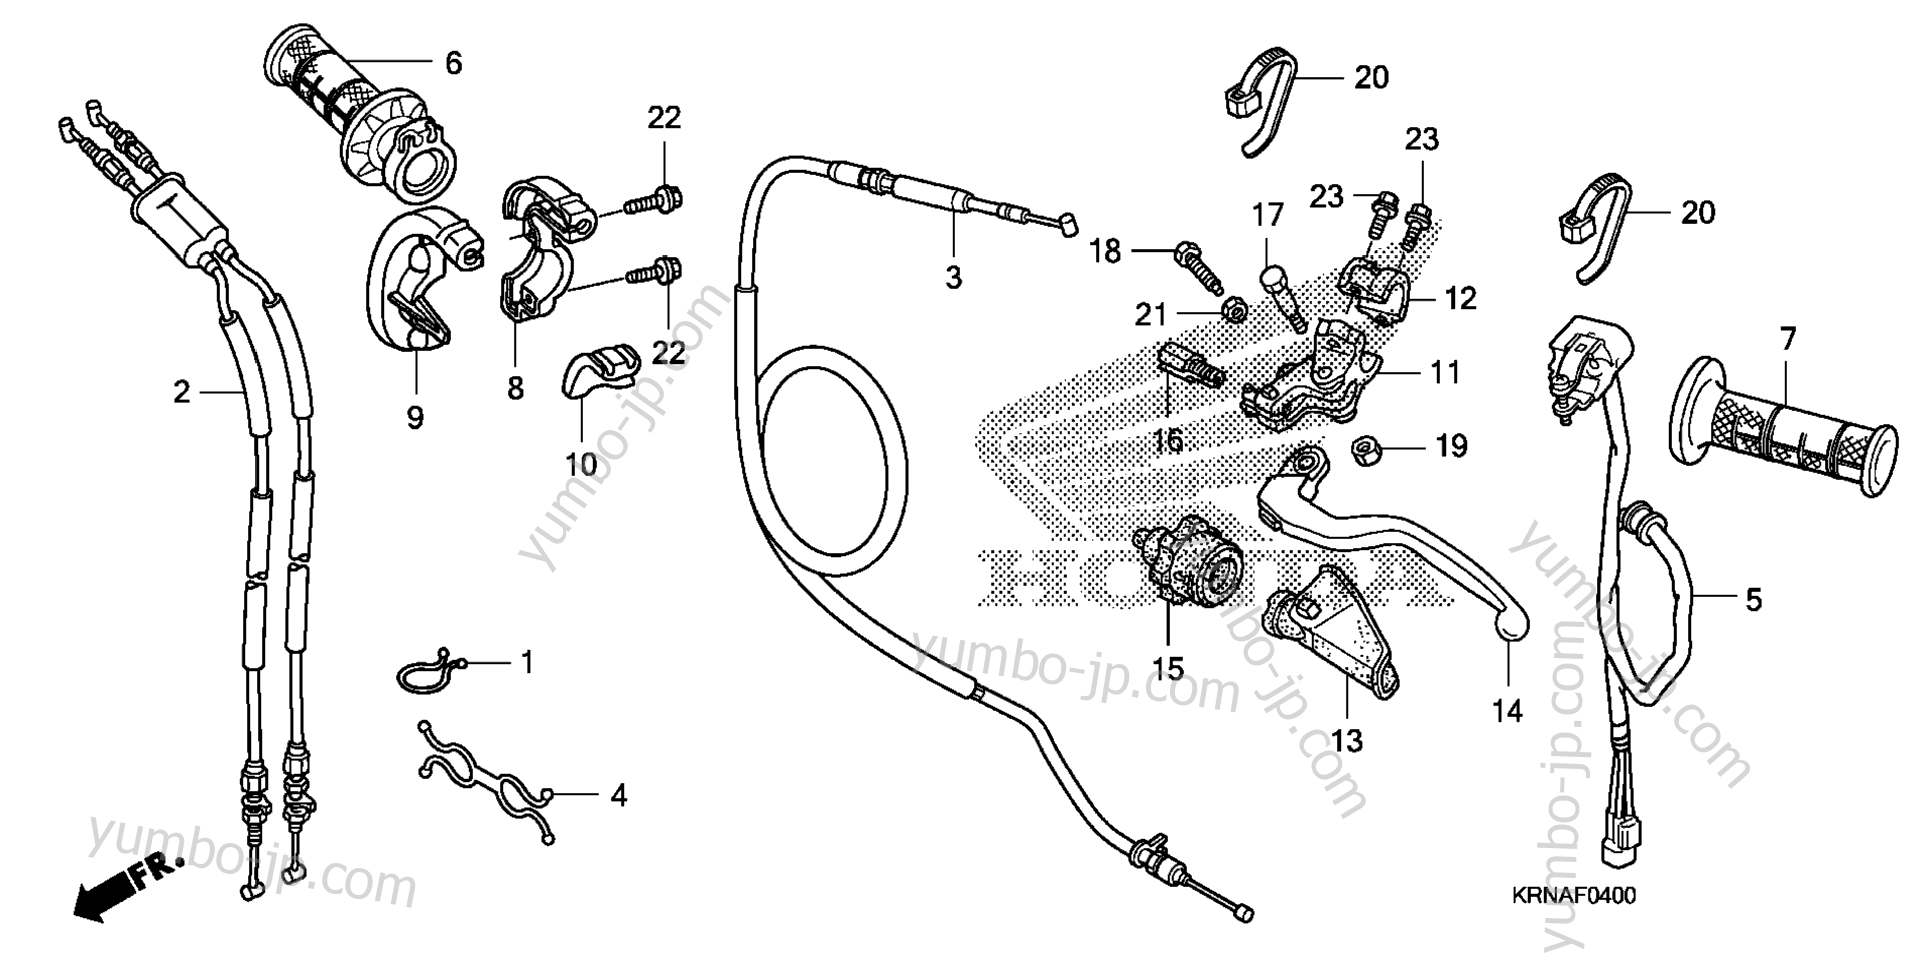 HANDLE LEVER / SWITCH / CABLE for motorcycles HONDA CRF250R A 2011 year